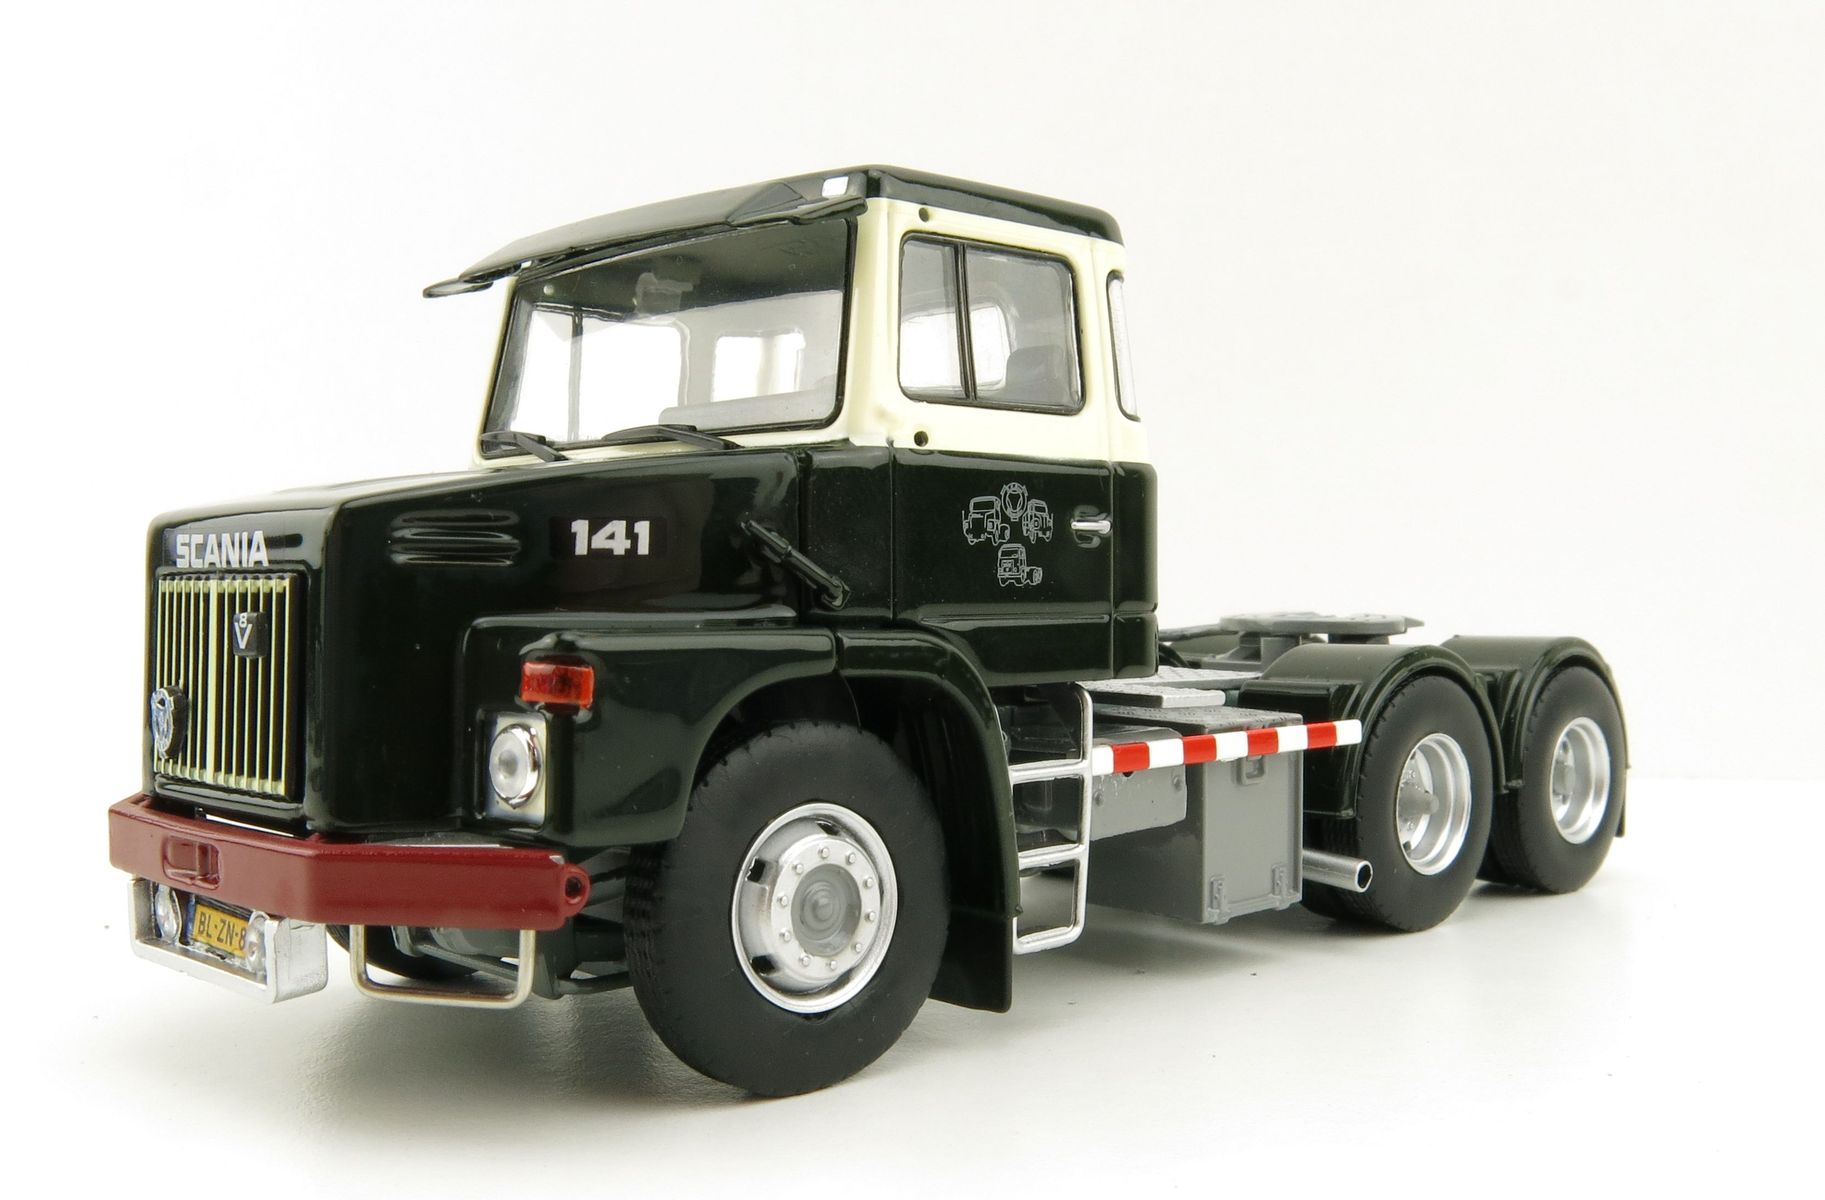 Product Image - Tekno 76165 Scania 141 Torpedo 6x2 Prime Mover - Kees Boot - Scale 1:50